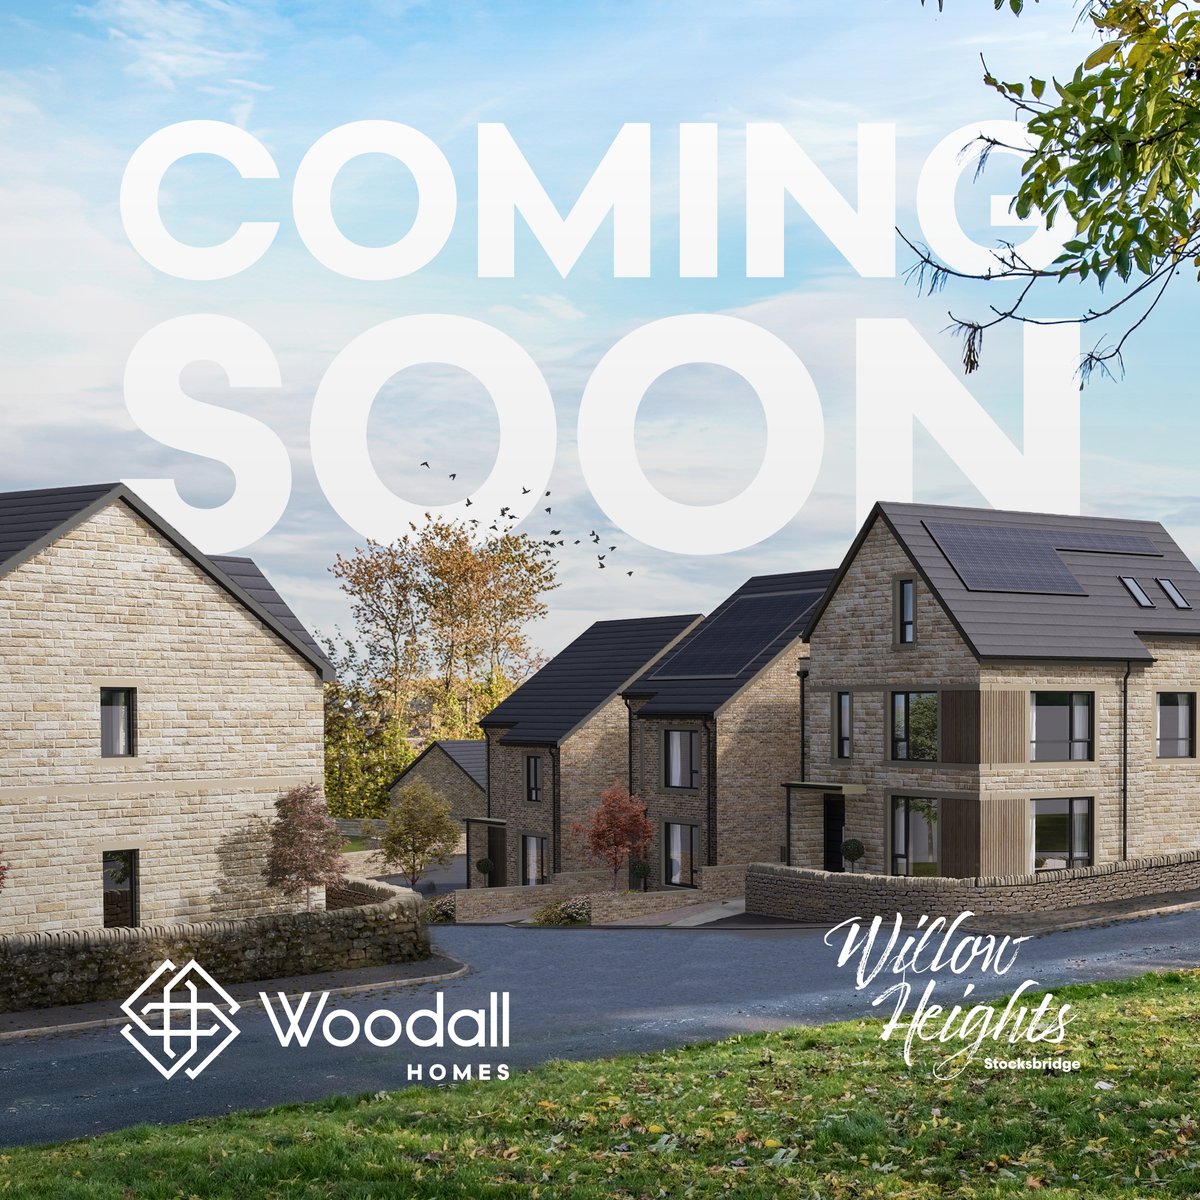 We are launching our new Willow Heights development later this month 🏡 

Keep an eye on our social media channels to be the first to hear when these outstanding properties go live!

#ComingSoon #NewHome #NewBuildHome #NewDevelopment